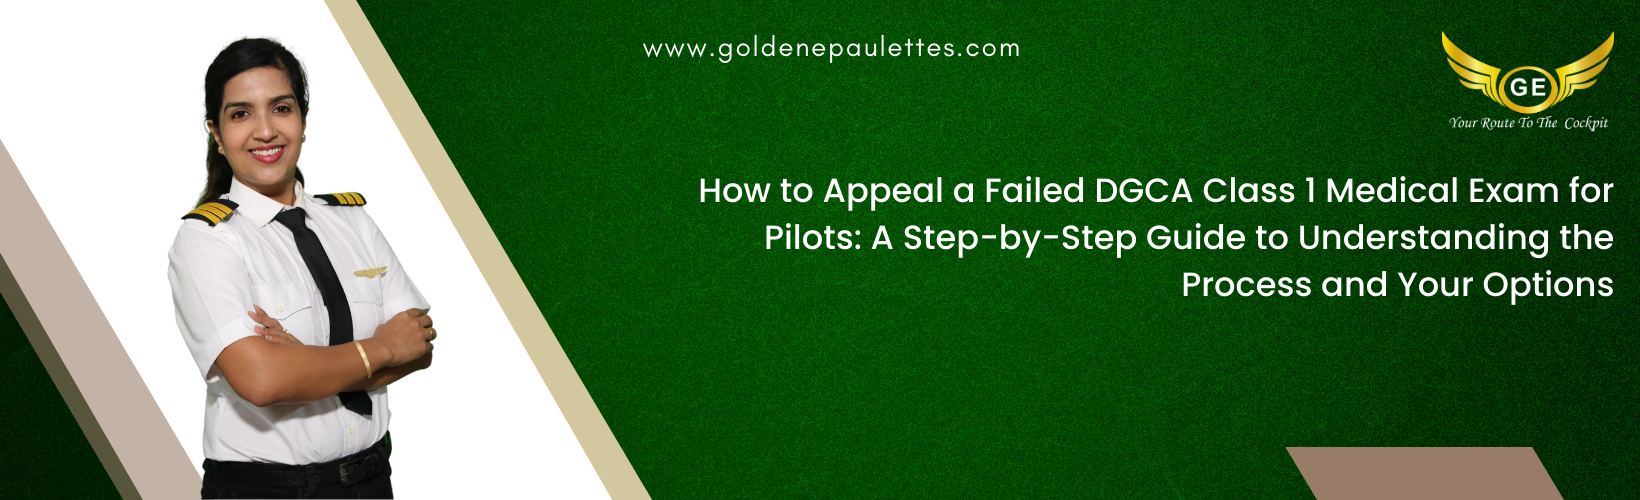 How to Appeal a Failed DGCA Class 1 Medical Exam for Pilots